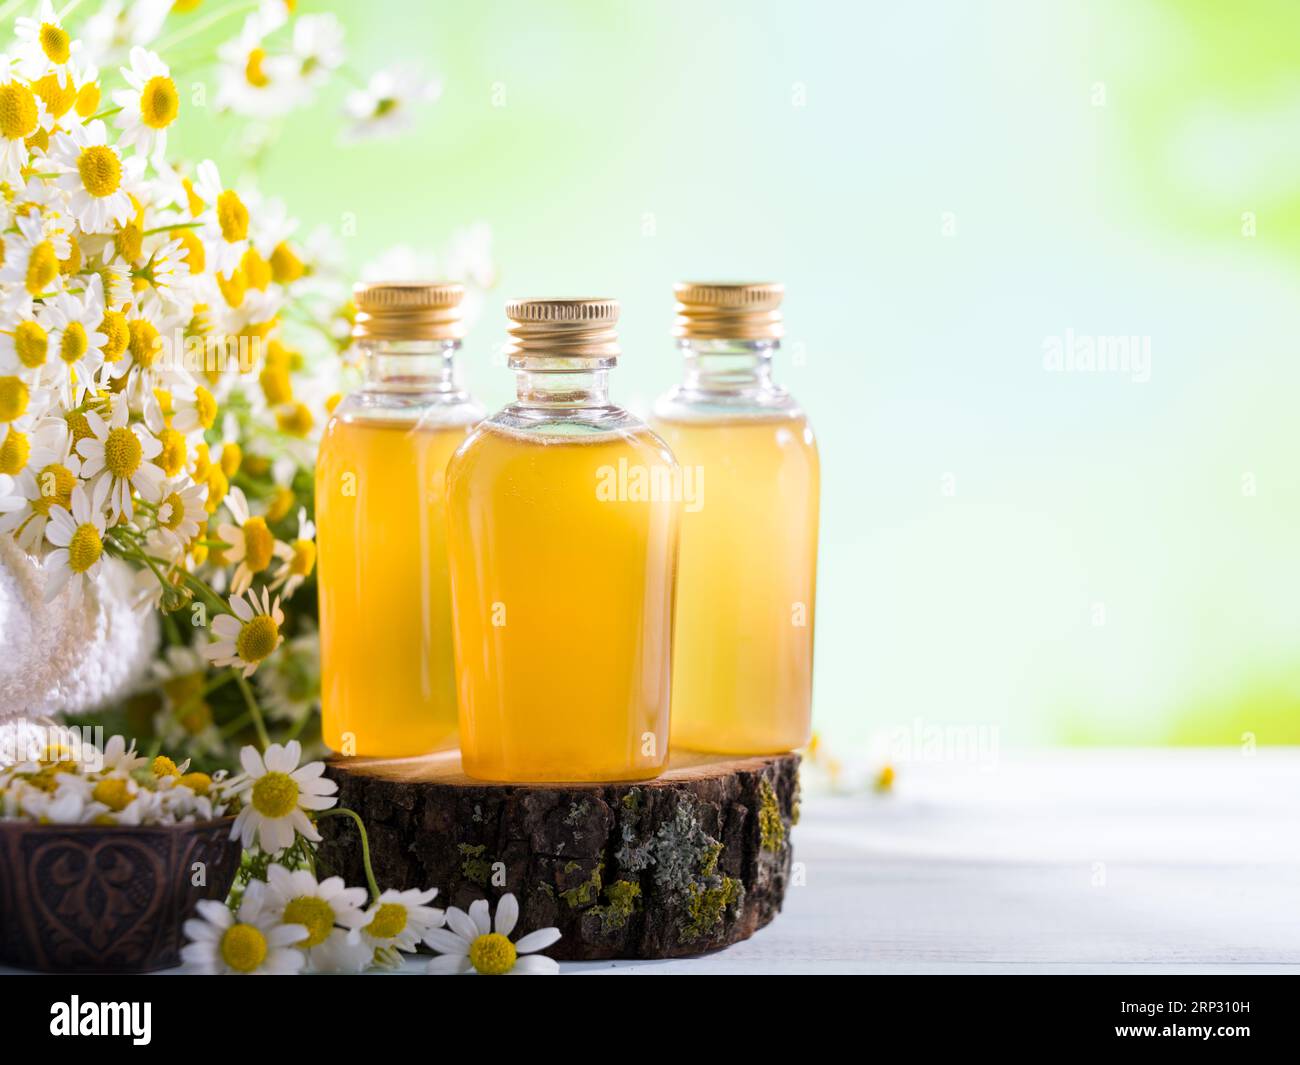 Chamomile oil or broth. Aromatic vegetable oils for hair and body care. Stock Photo